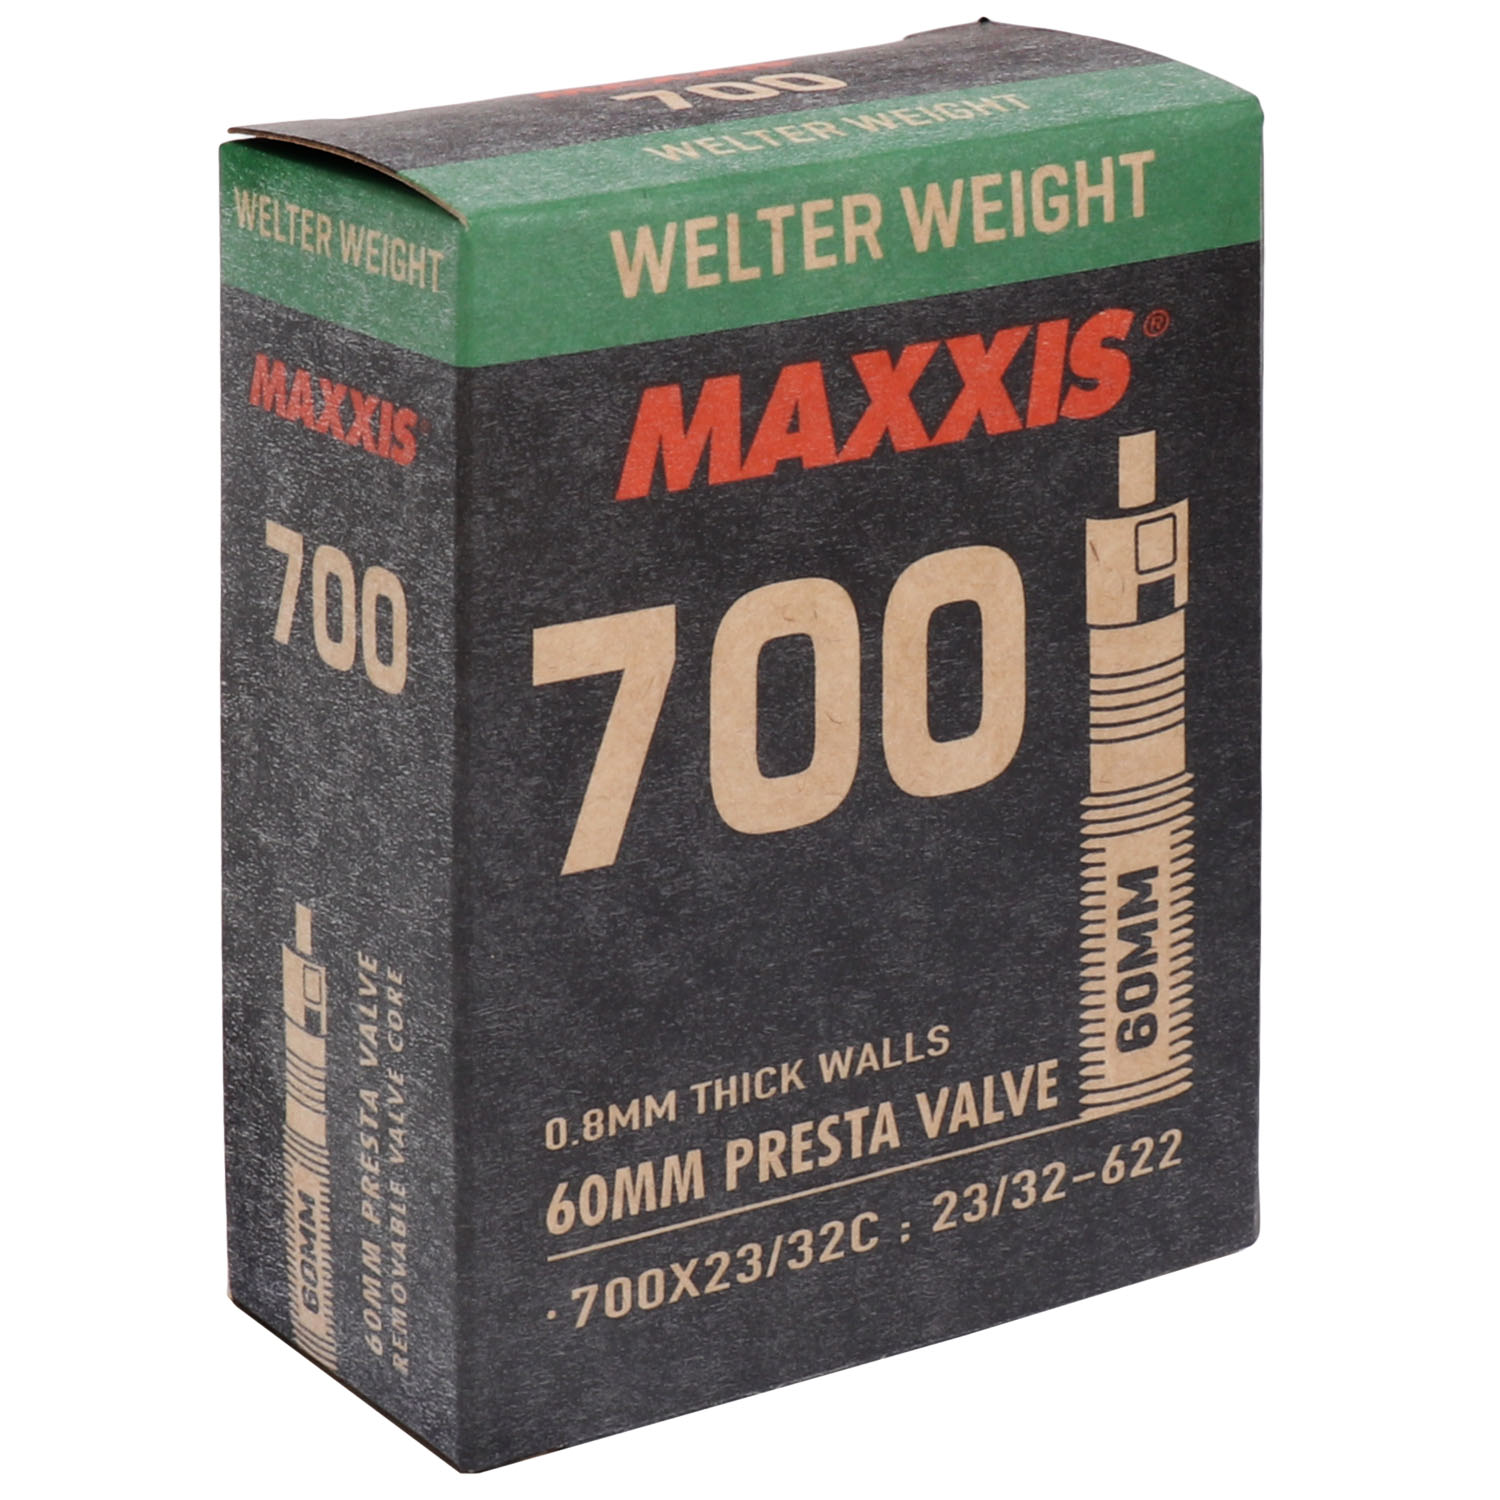 Picture of Maxxis WelterWeight Road Tube - 700x23/32C - Presta - 60mm